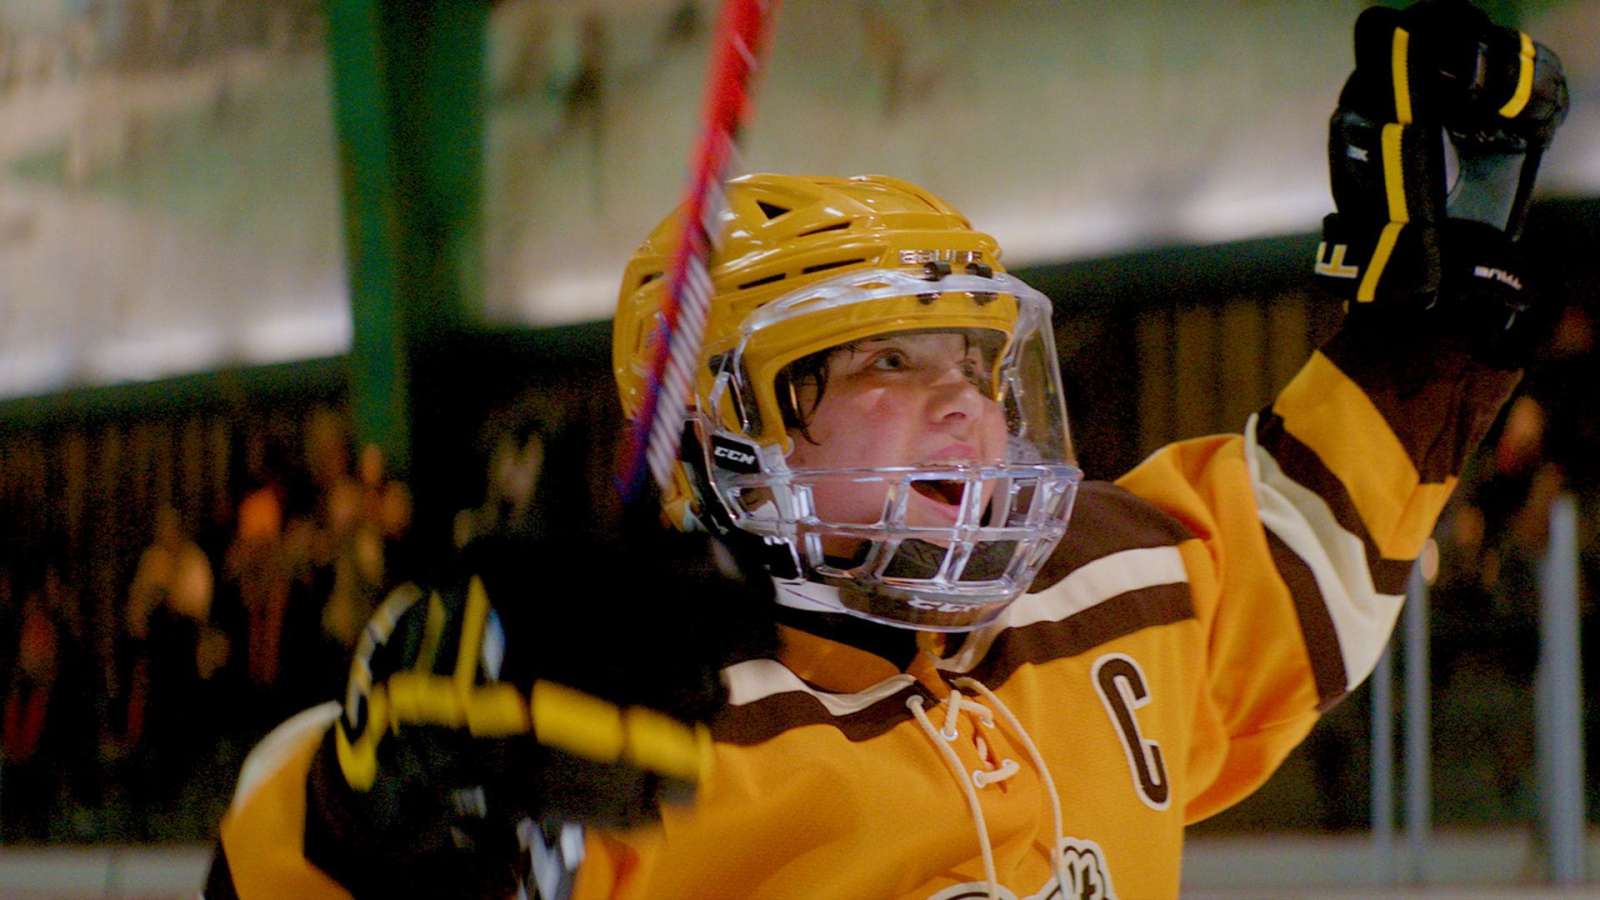 The Mighty Ducks: Game Changers : Cherry Picker